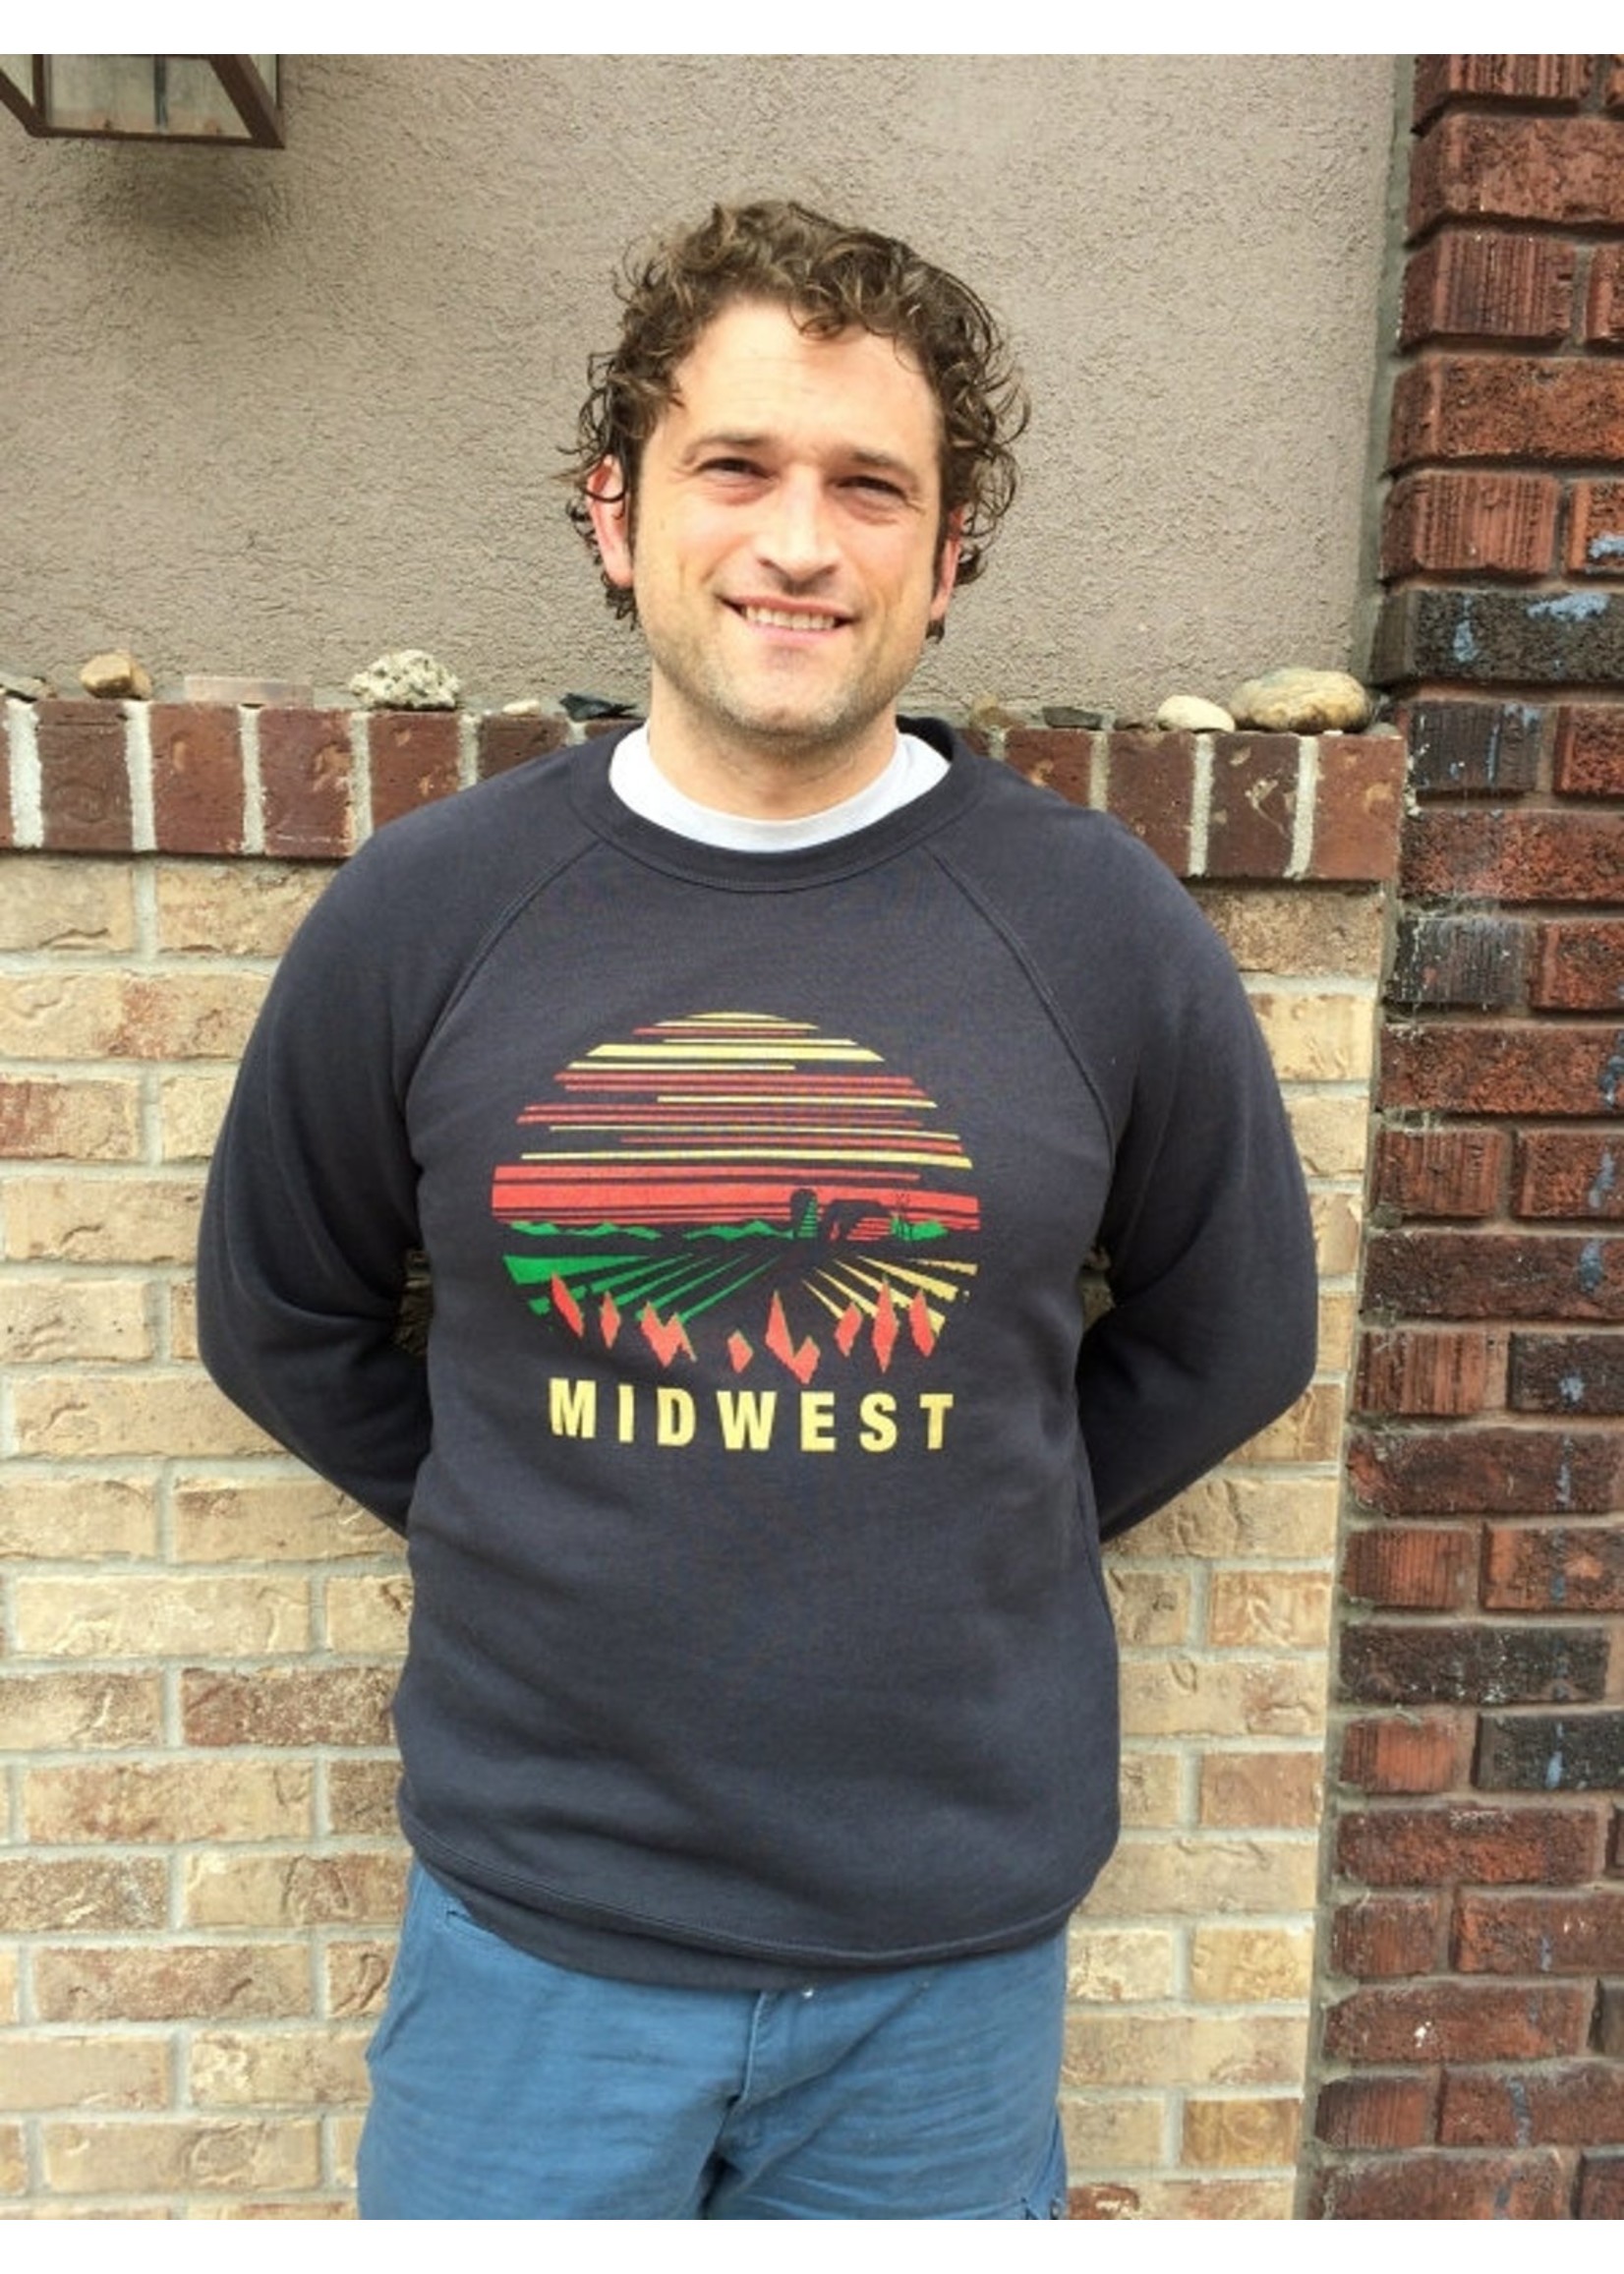 Midwest Adult Crew Neck Sweatshirt - Tangled Up In Hue